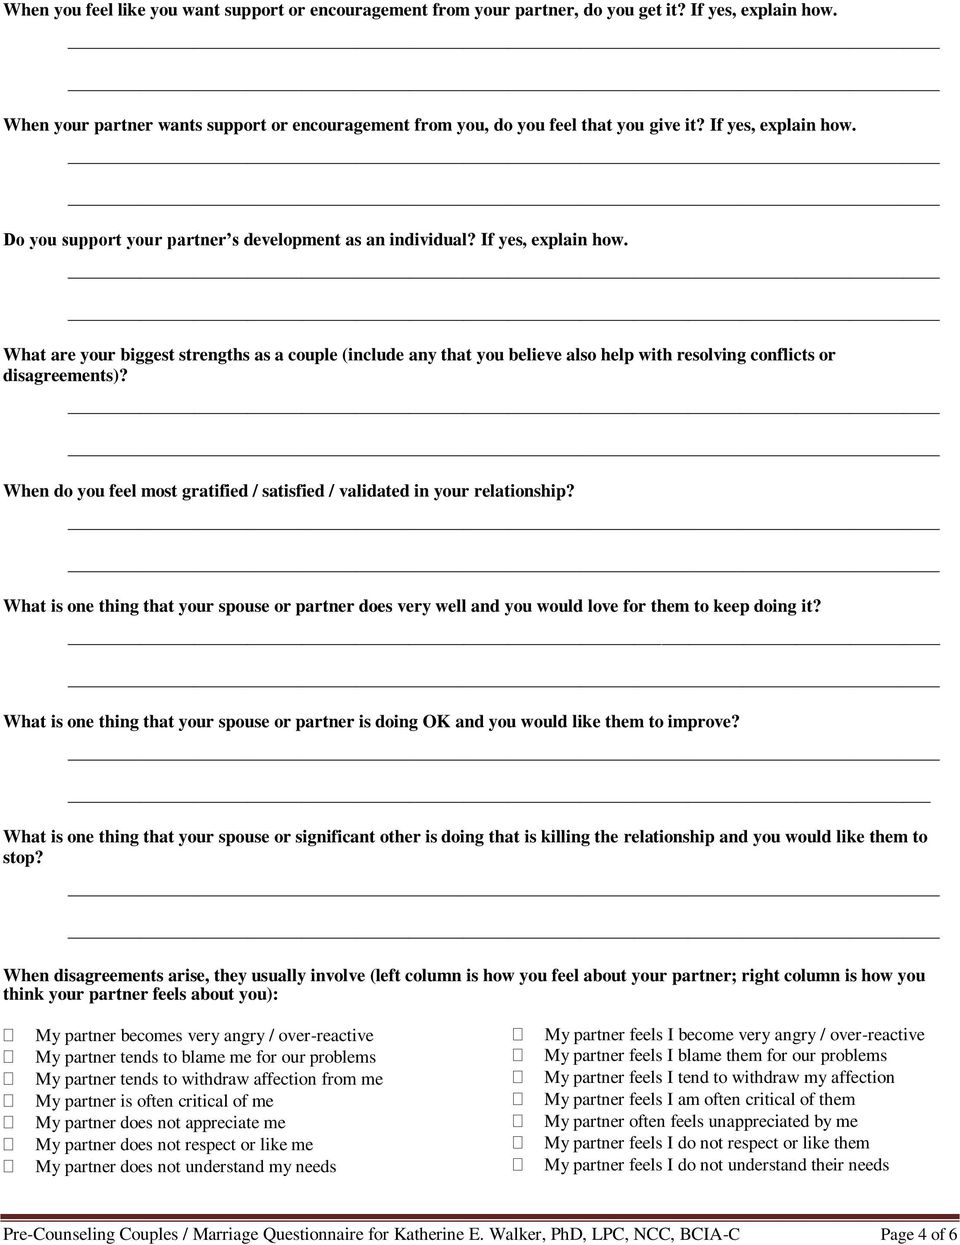 Marriage for couples questionnaire pre Pre